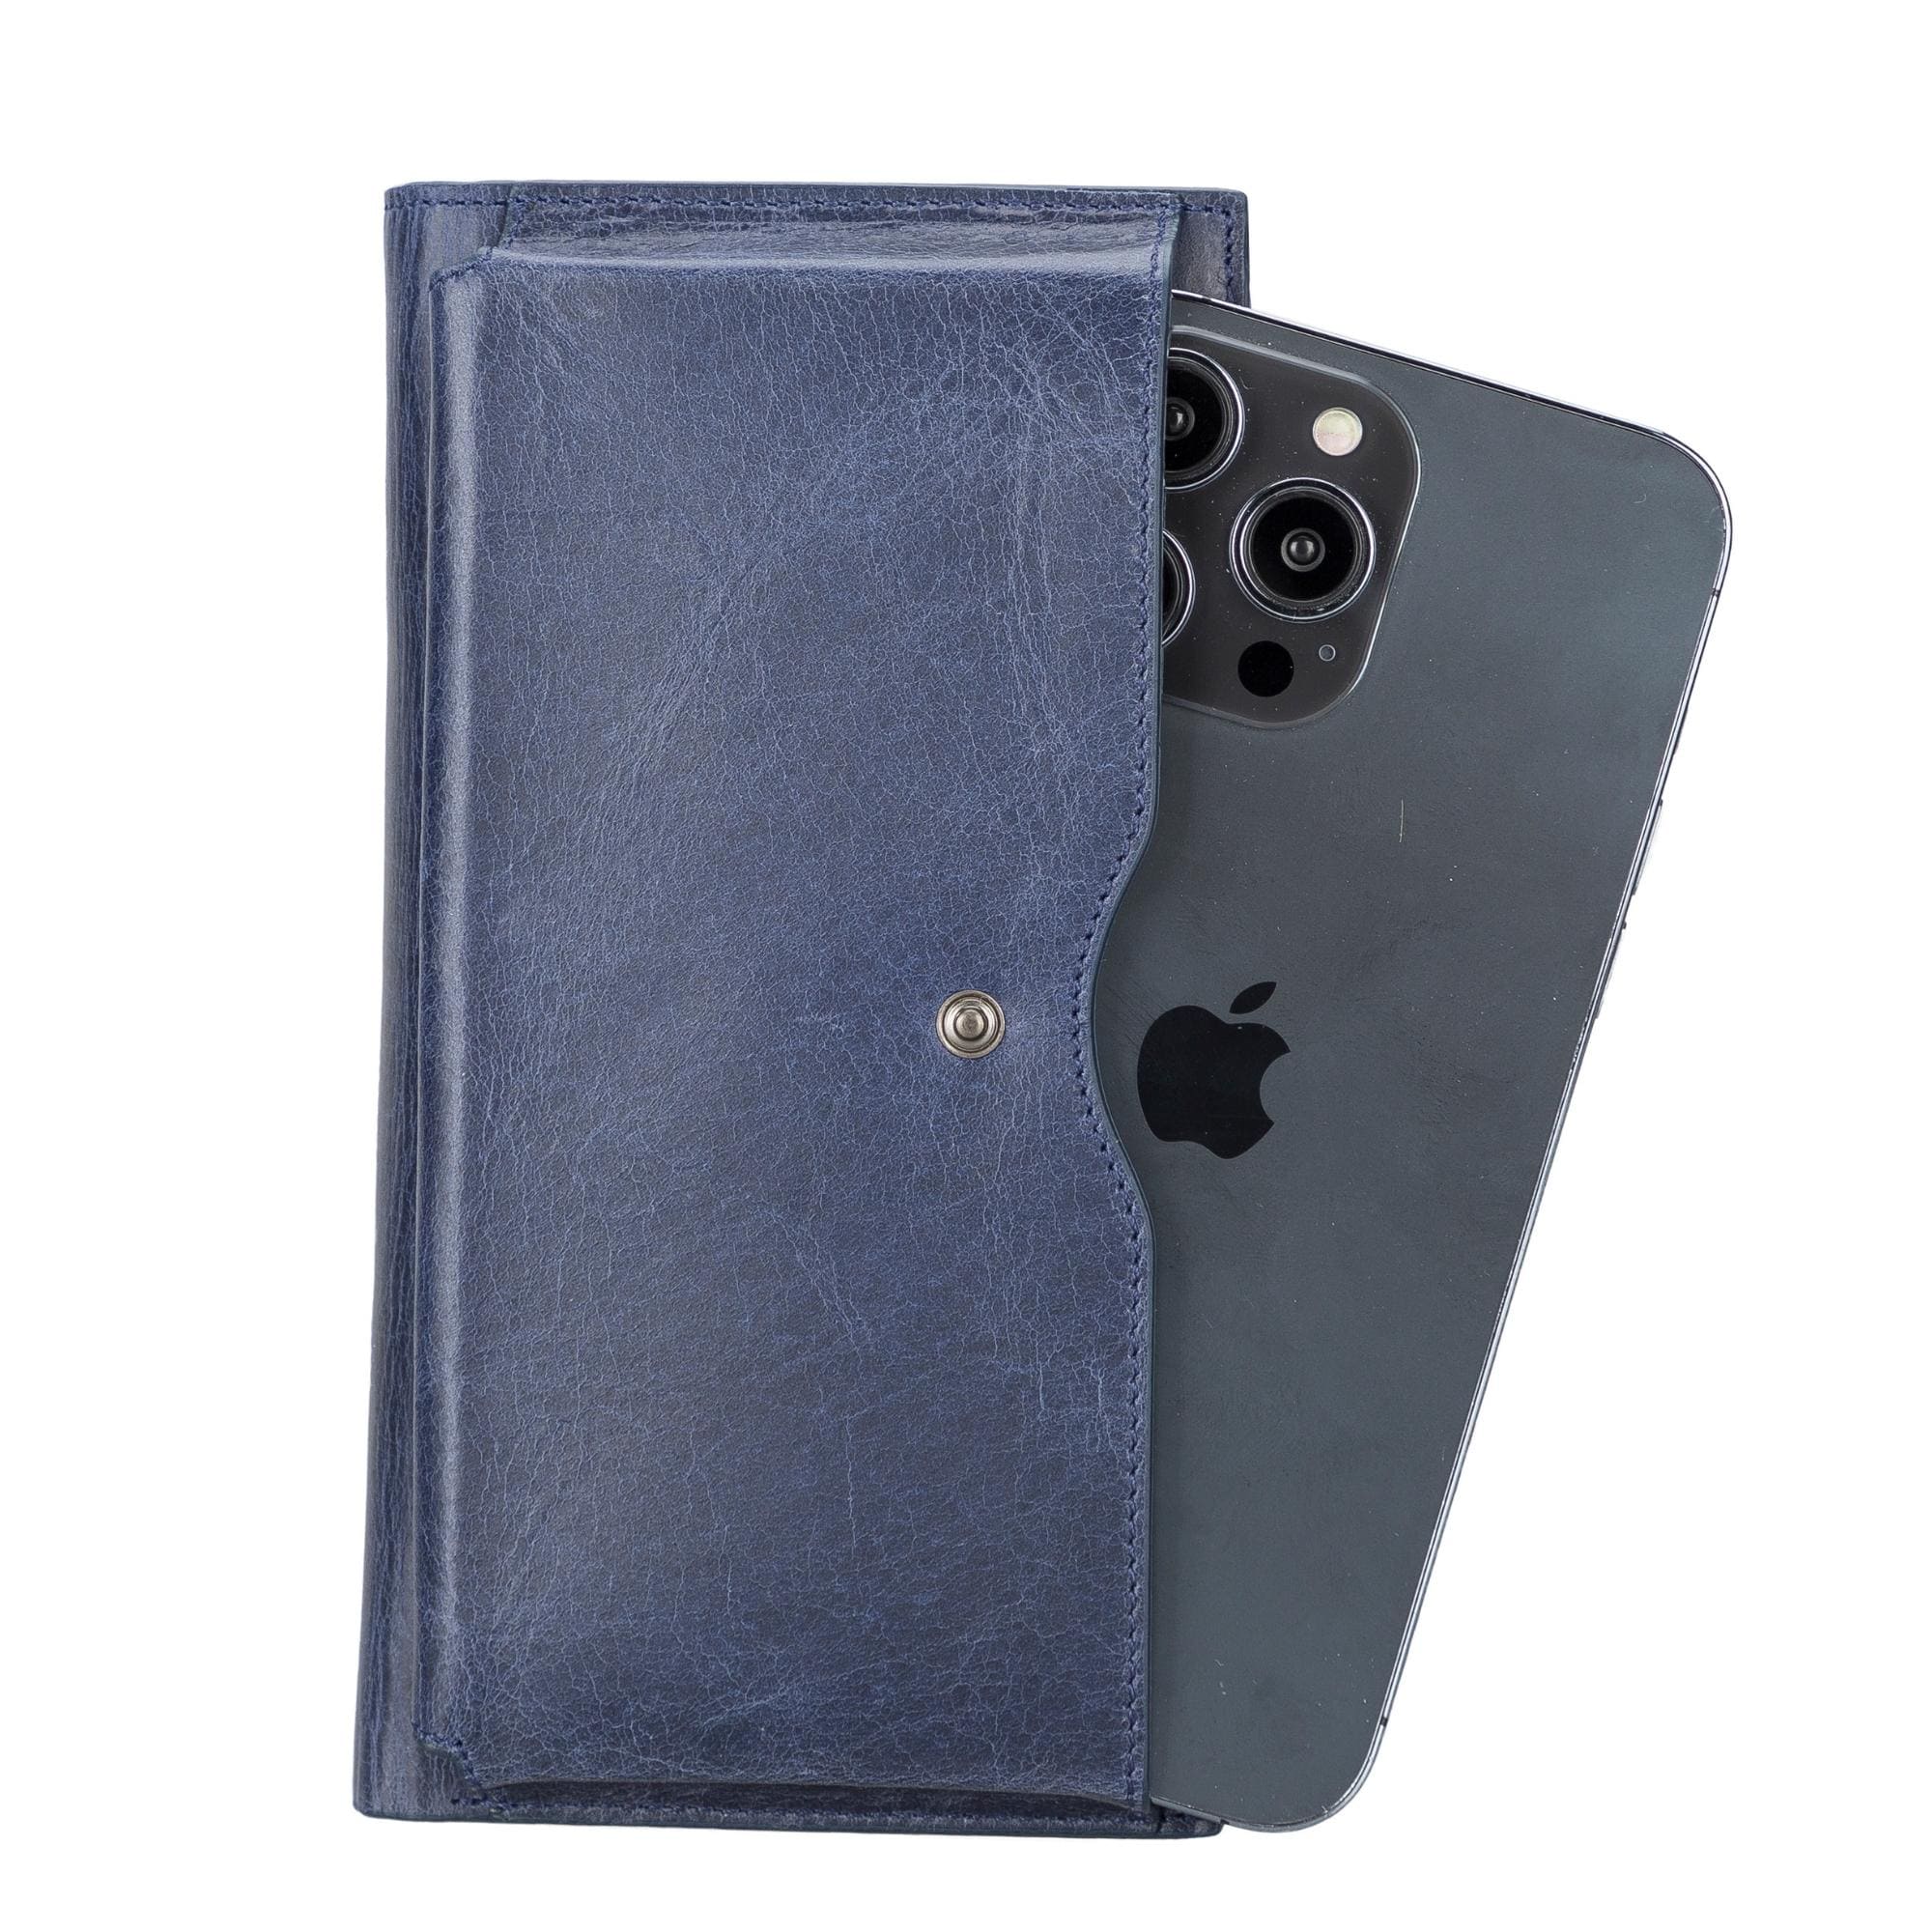 Riverton Leather Wallet for Women with Phone Section - Dark Blue - TORONATA